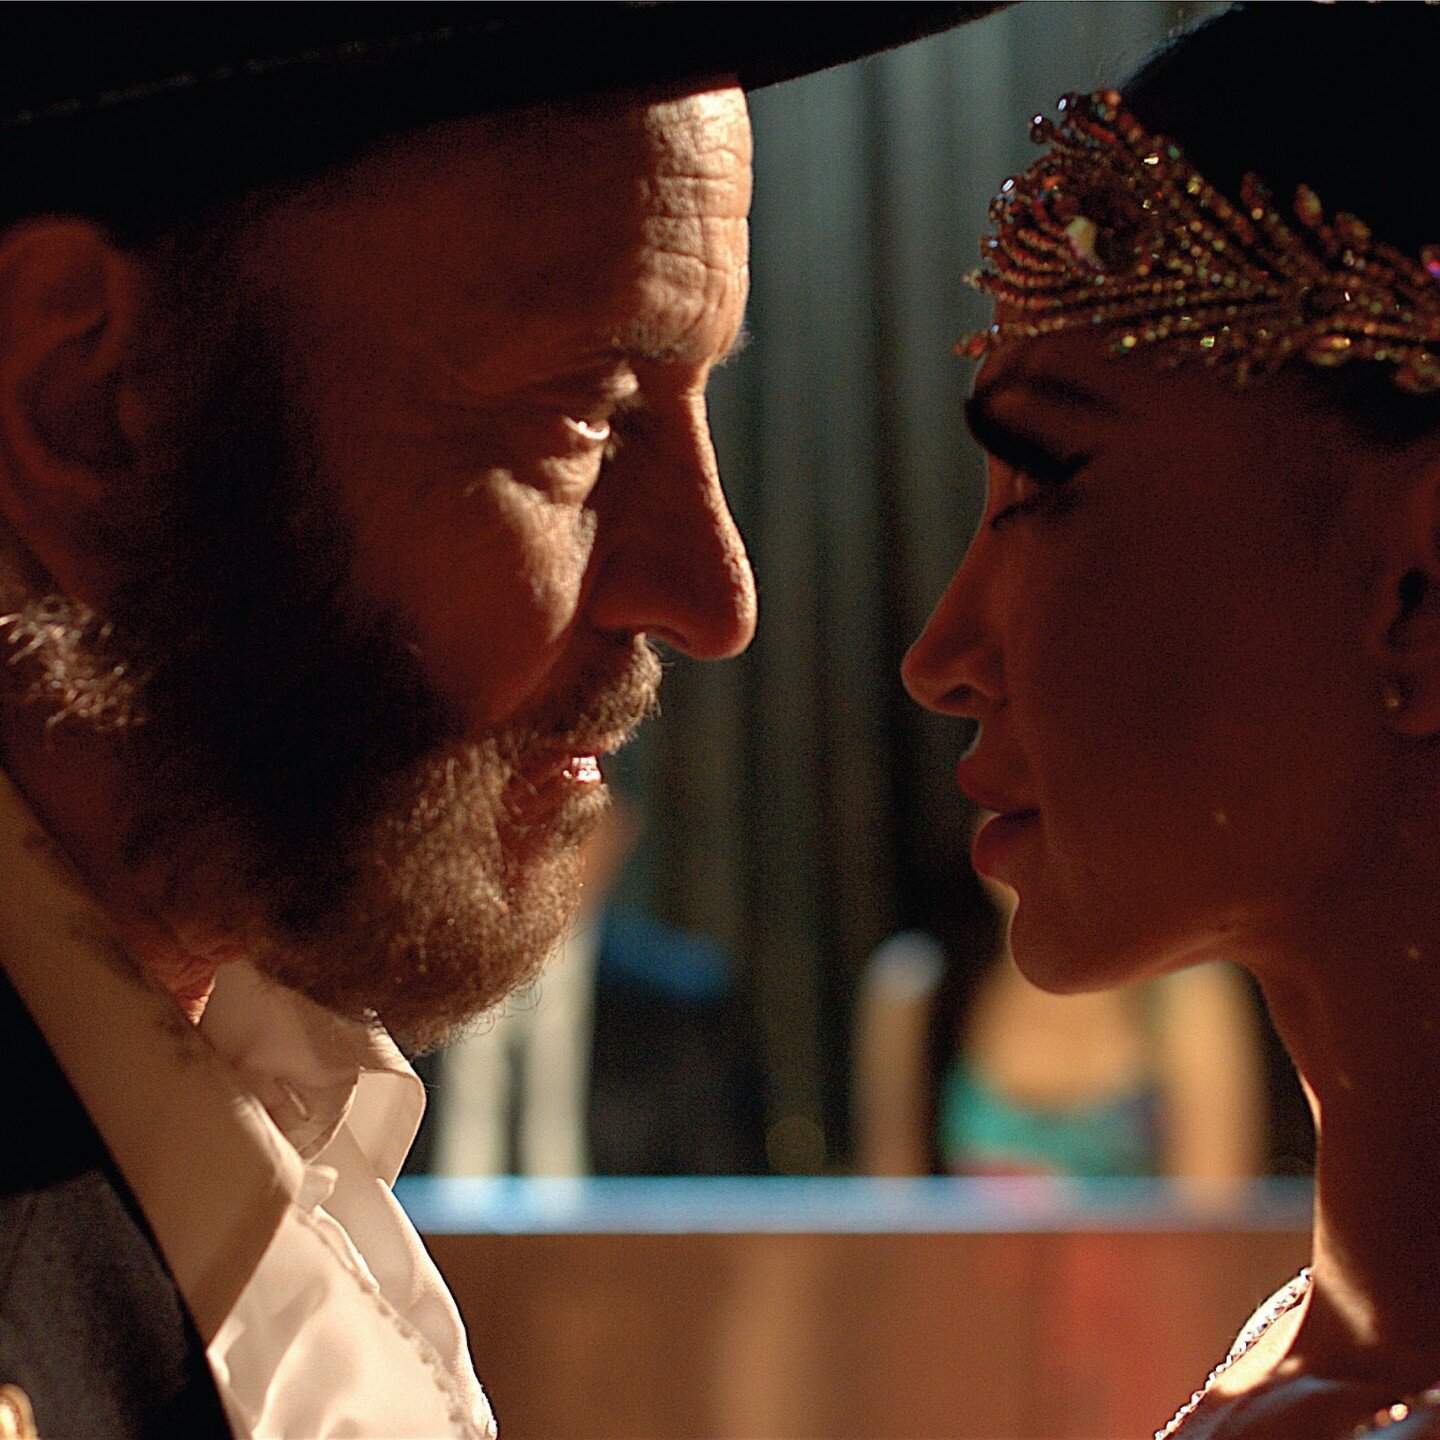 Vision Films' Holiday and feel good family movie Tango Shalom is half price for the Holidays! 
 

https://vimeo.com/ondemand/tangoshalom

Using code HOLIDAYCHEER gives viewers 50% off holiday rentals or purchases through January 2nd.

For this UNIQUE